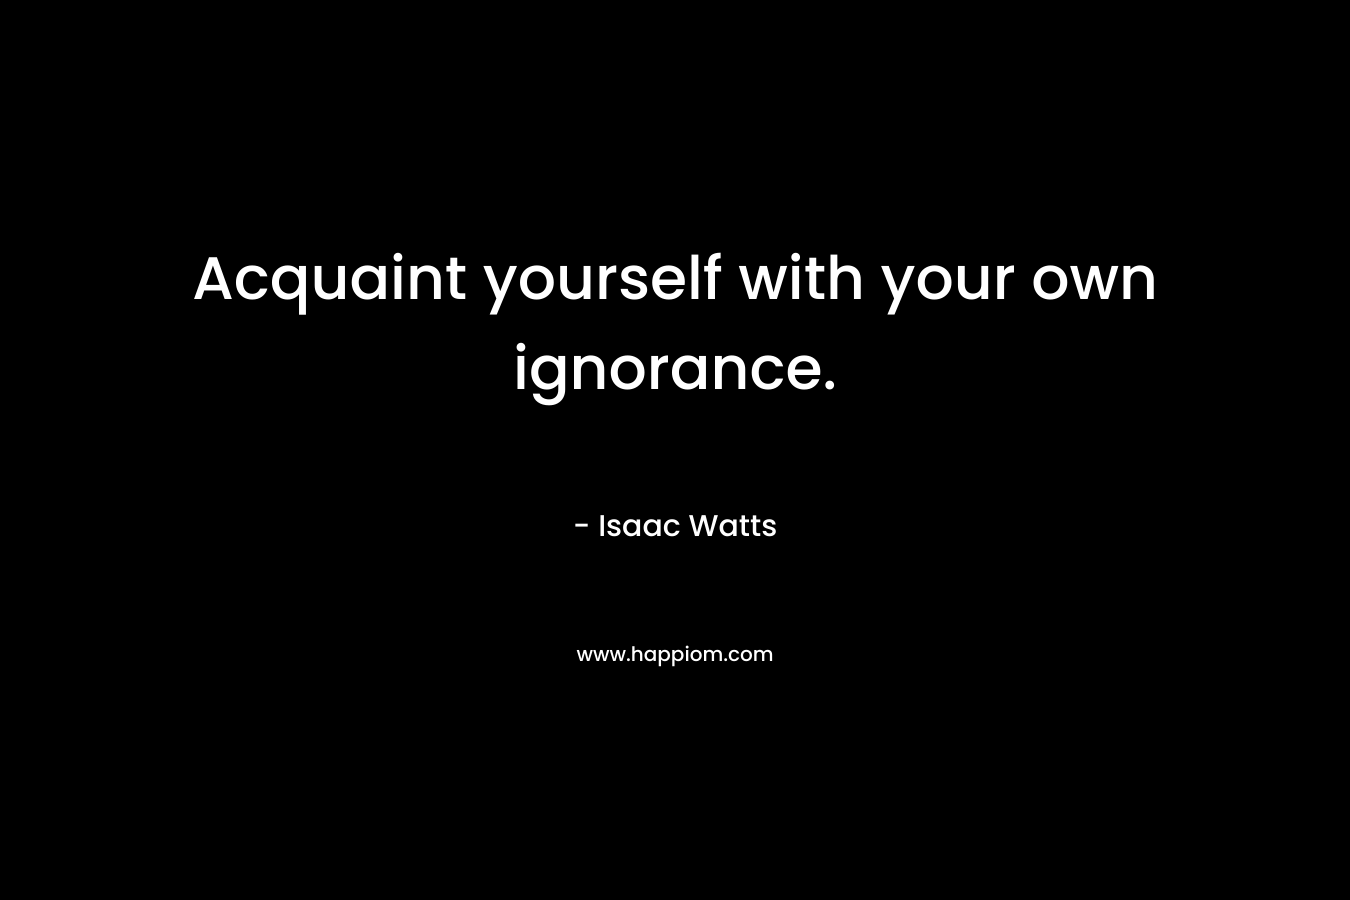 Acquaint yourself with your own ignorance.